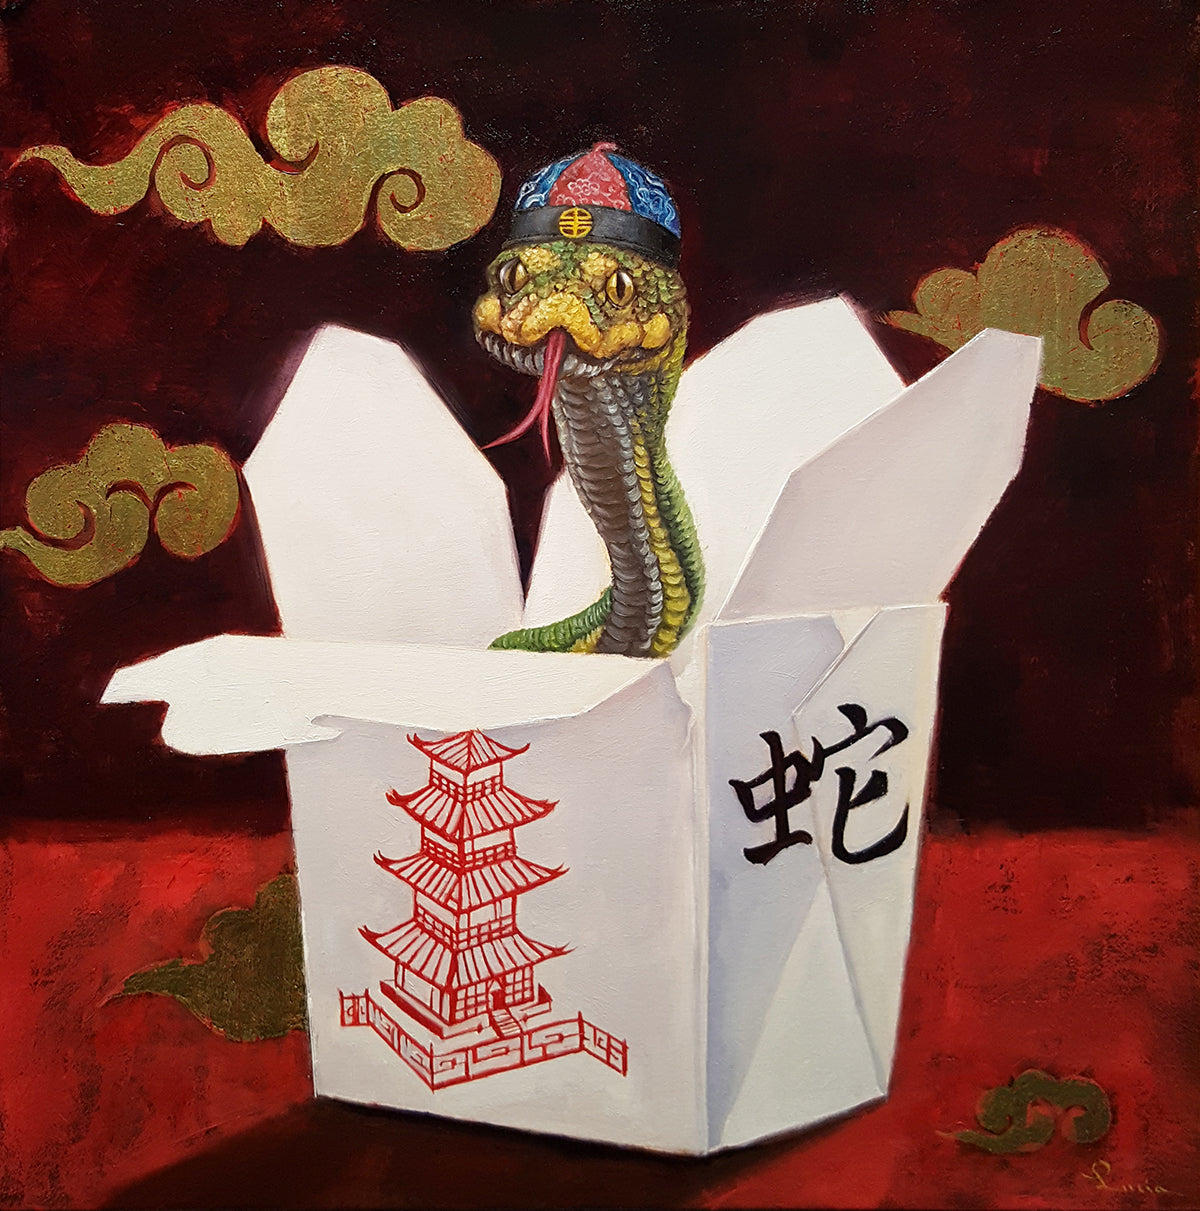 Takeout with a Twist (Year of the Snake)